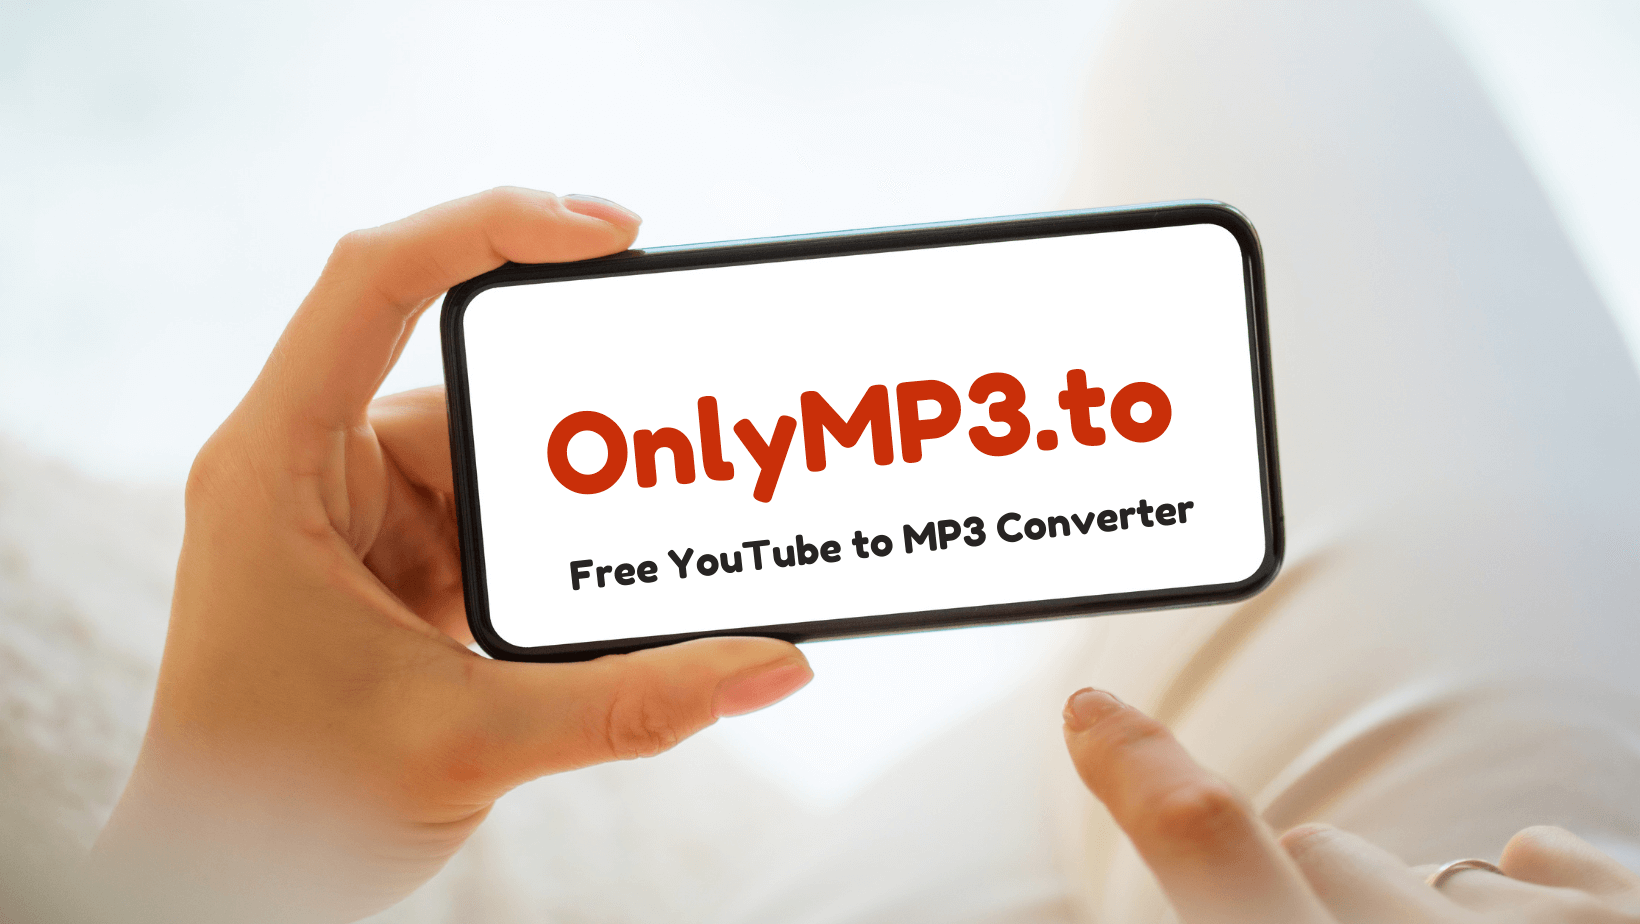 Free YouTube to MP3 Converter and Downloader - OnlyMP3